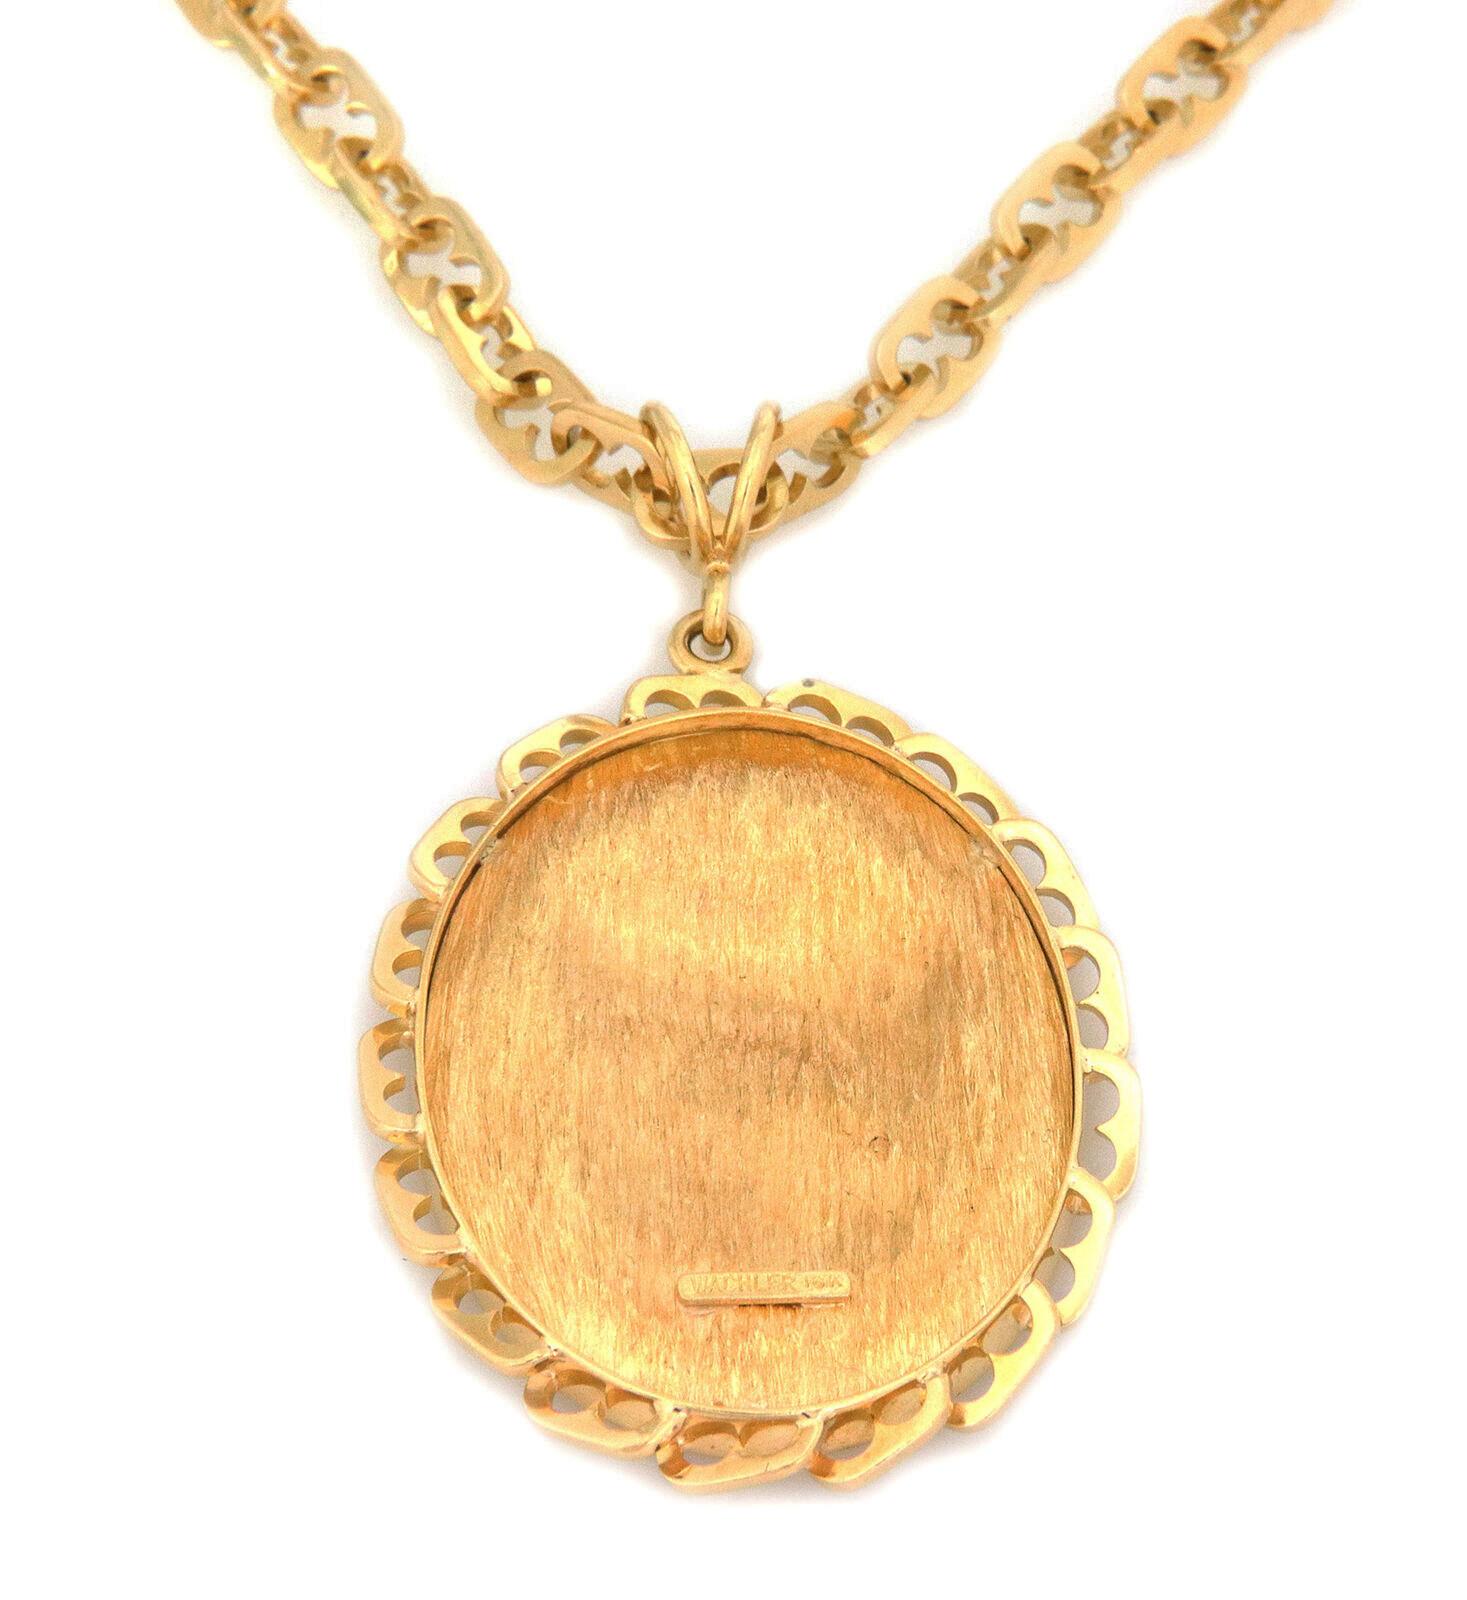 This estate signed Wachler pendant and chain is crafted from 18k yellow gold. The pendant features an indent oval frame with similar mariner design links border as the chain. The center of the oval pendant has a lovely, embossed details head of a